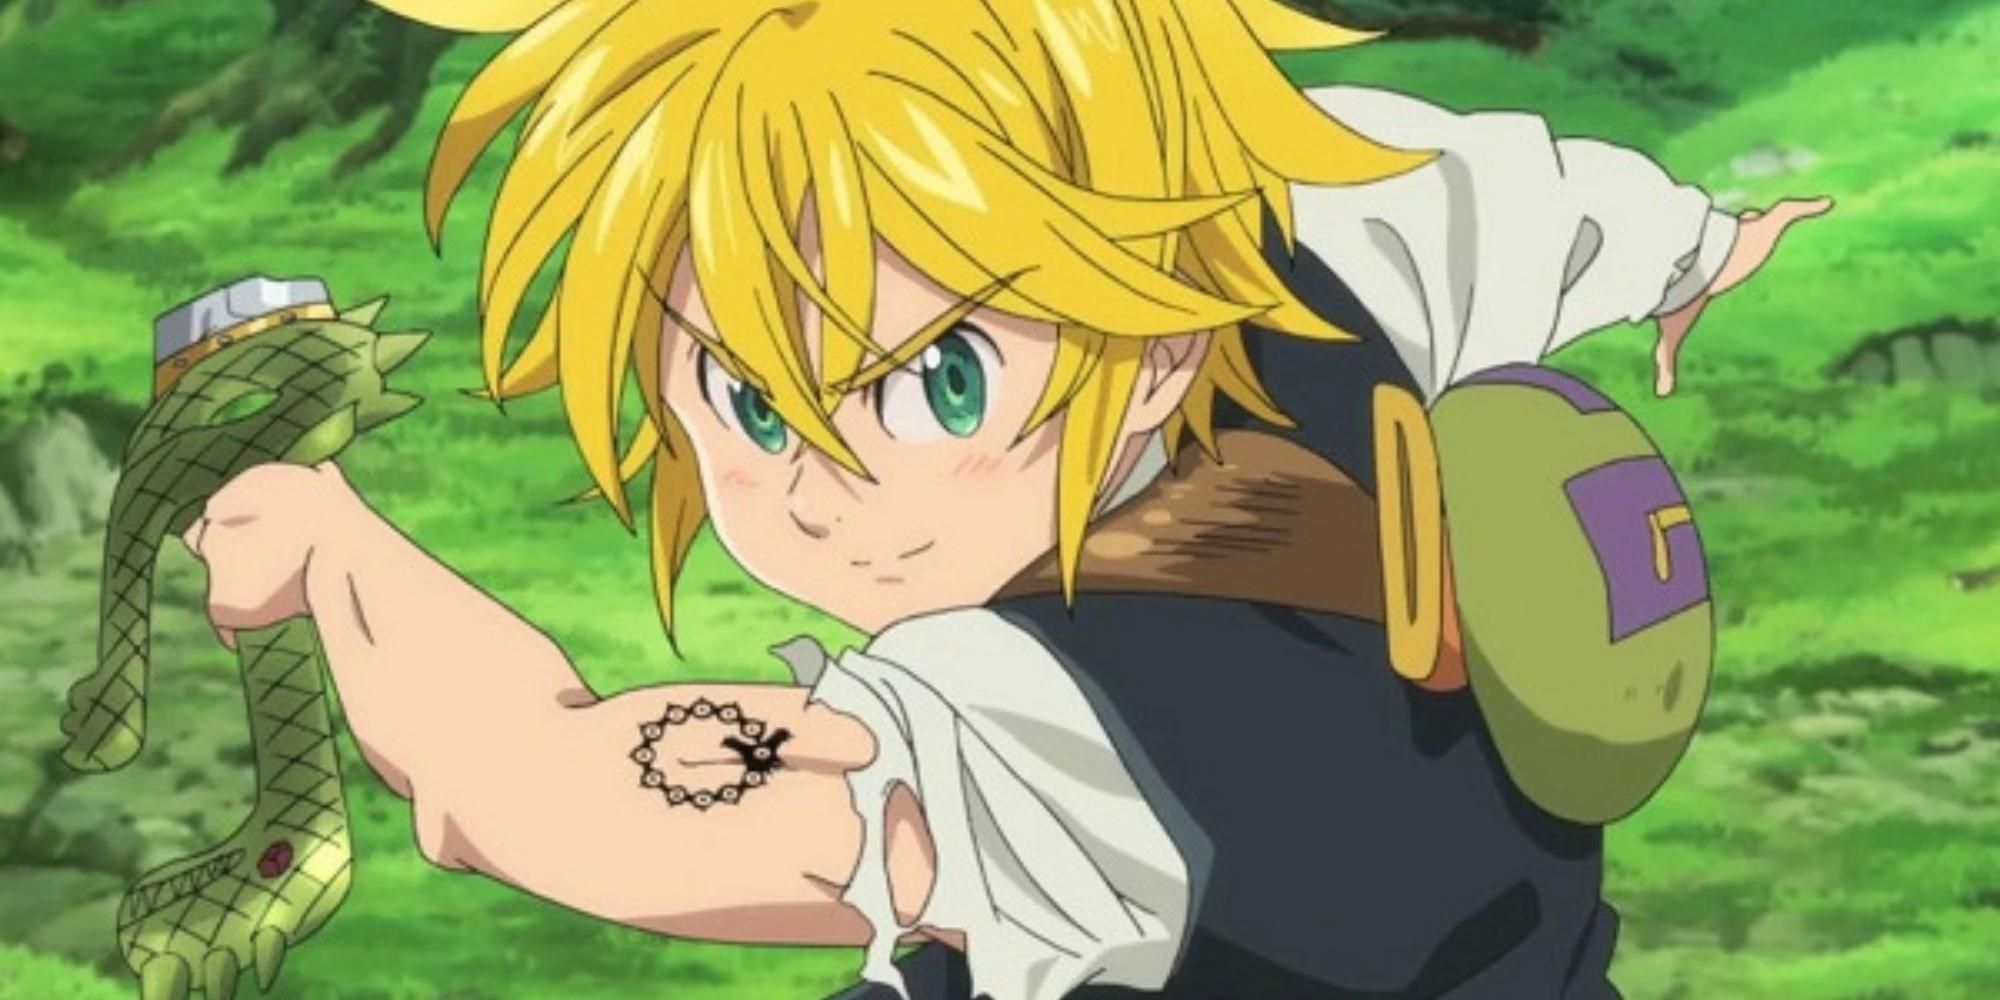 Melodias with his tattoo visible in 7 Deadly Sins